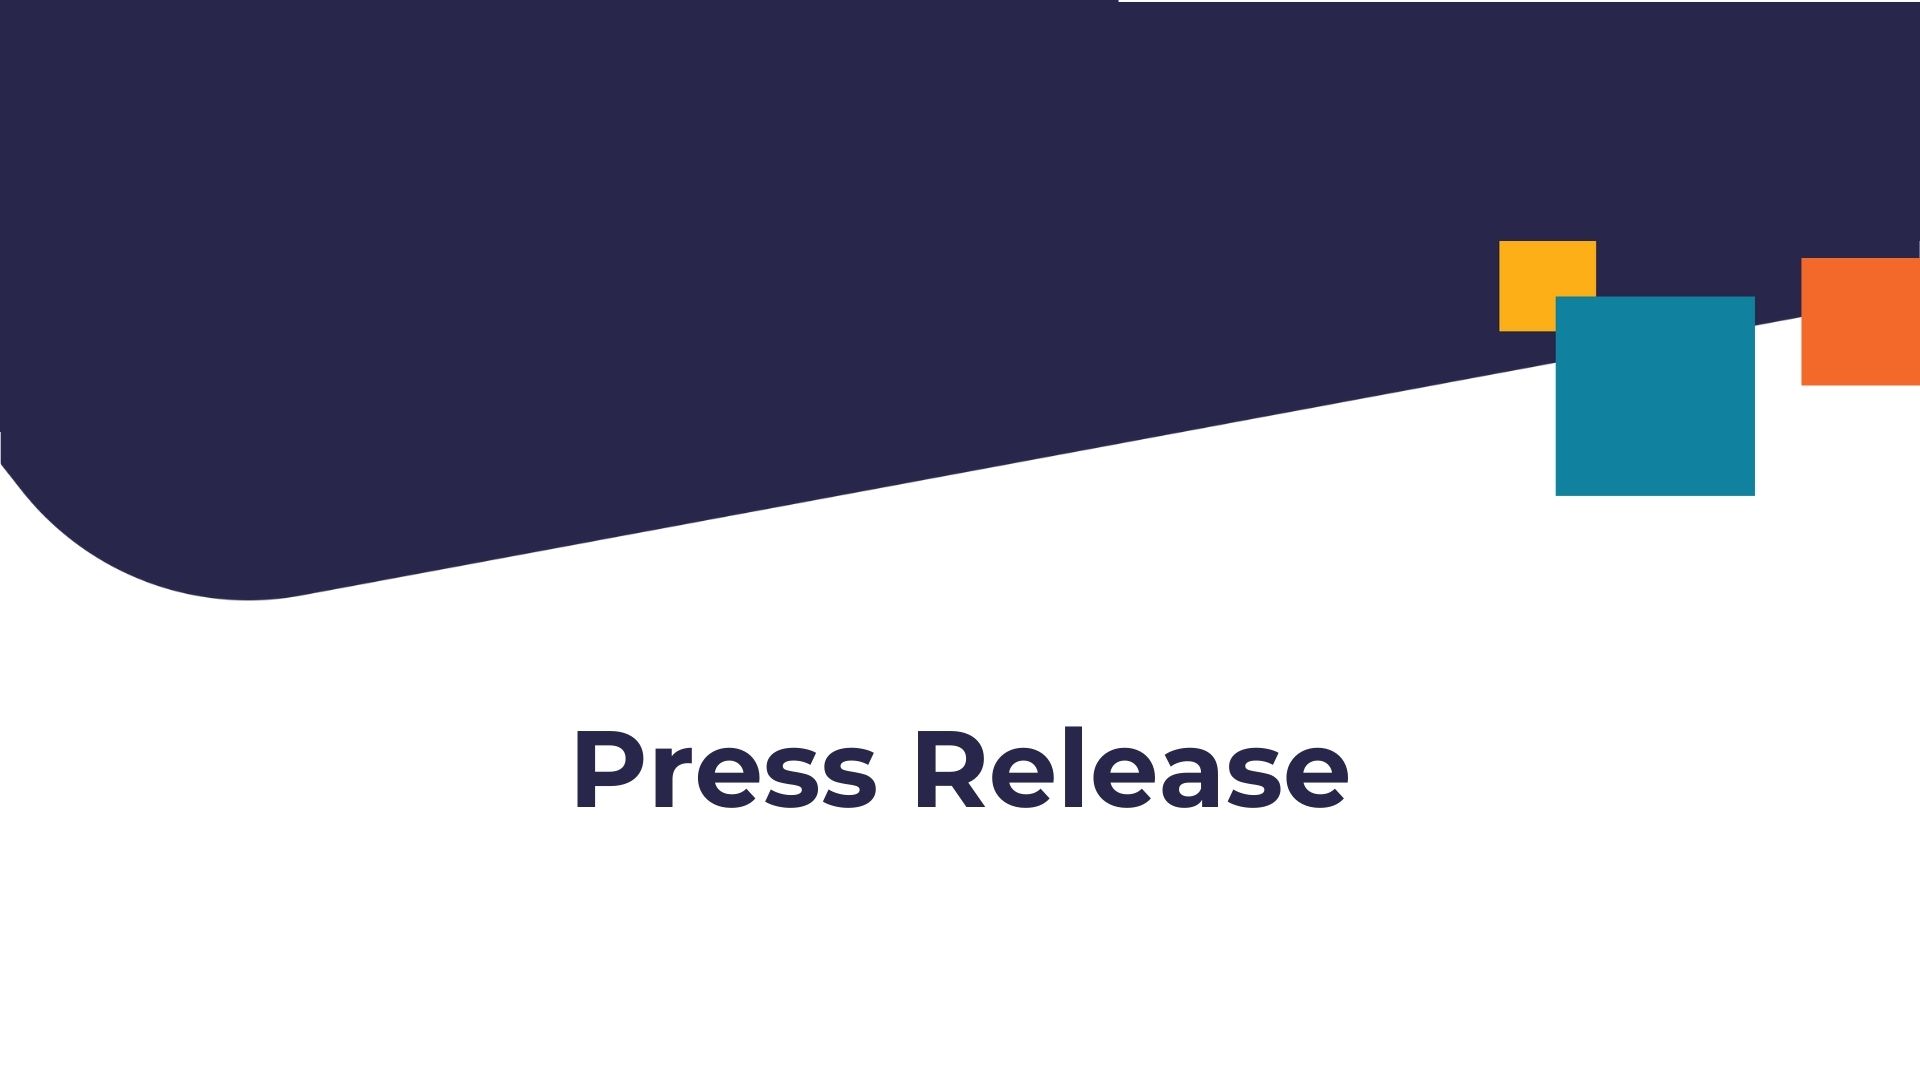 CEMD branded dark navy and white background with three graphic squares in teal, orange, and yellow of varying sizes with text, "Press Release."